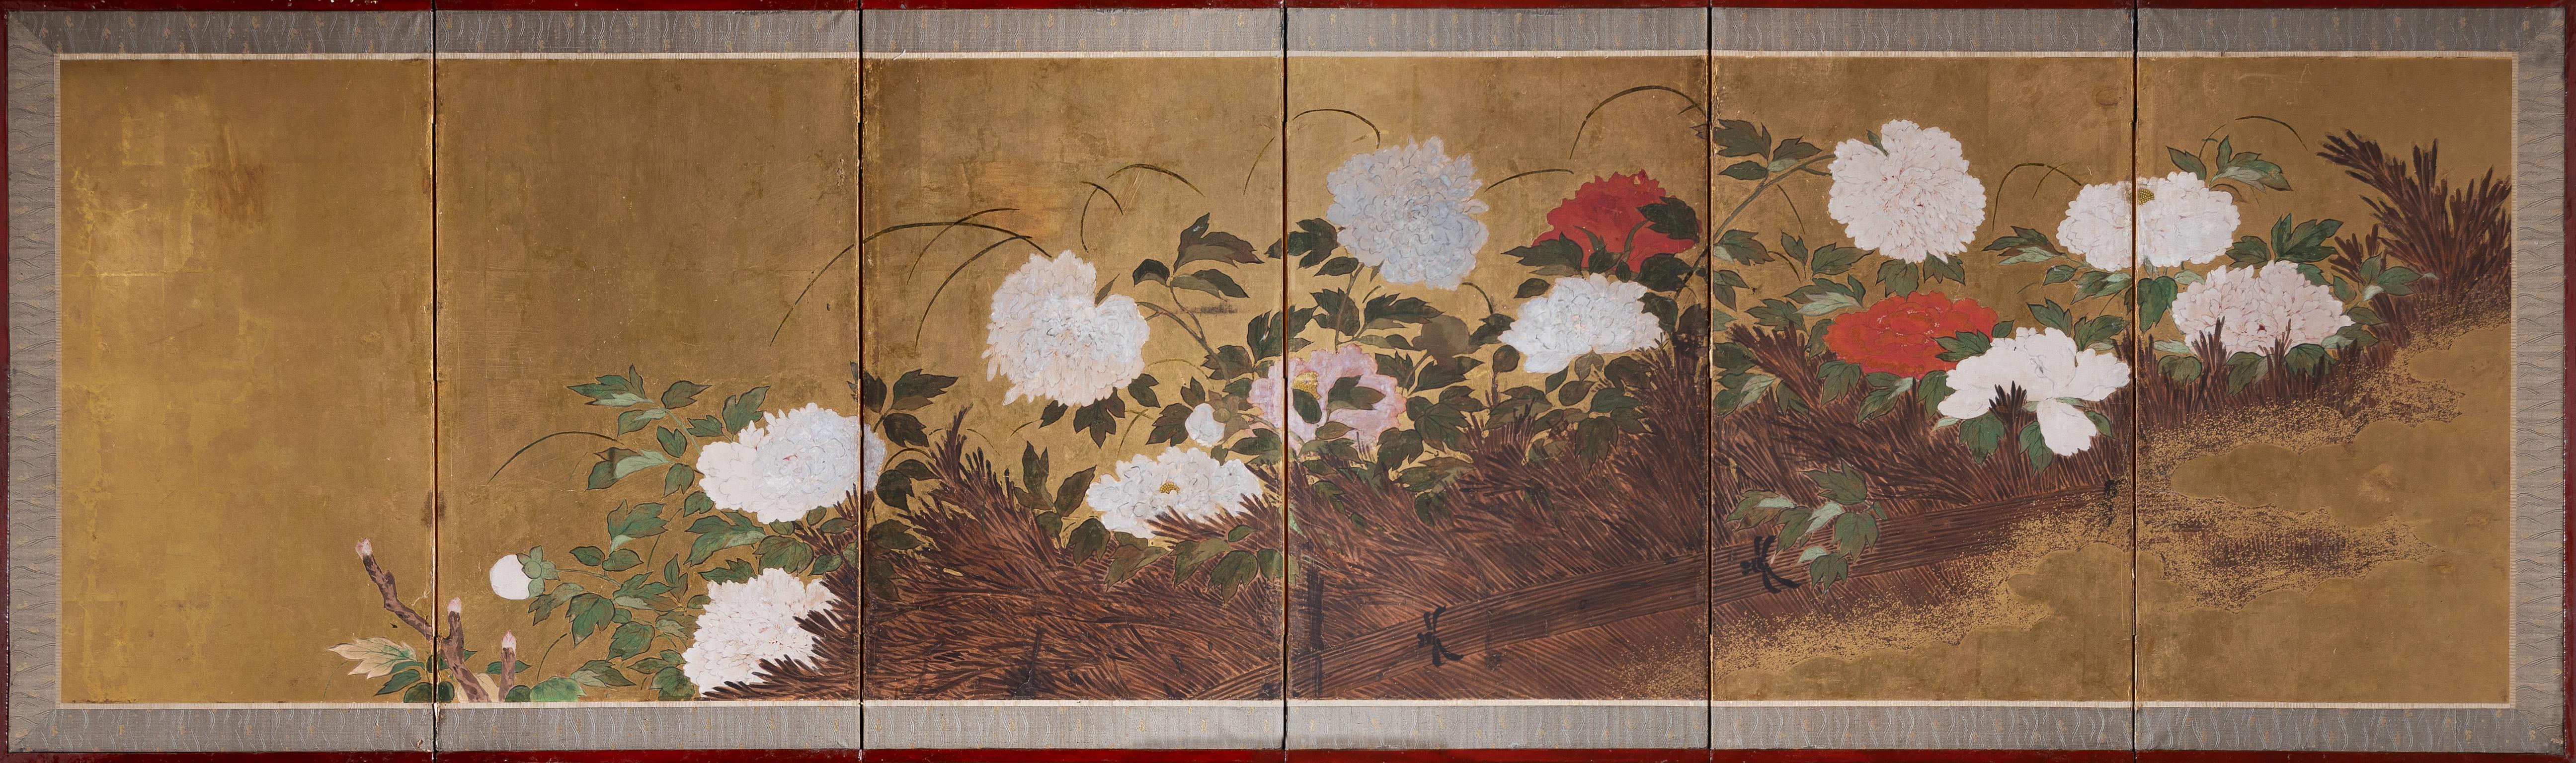 Japanese Pair of Six-Panel Folding Screens with Peonies and Other Flowers For Sale